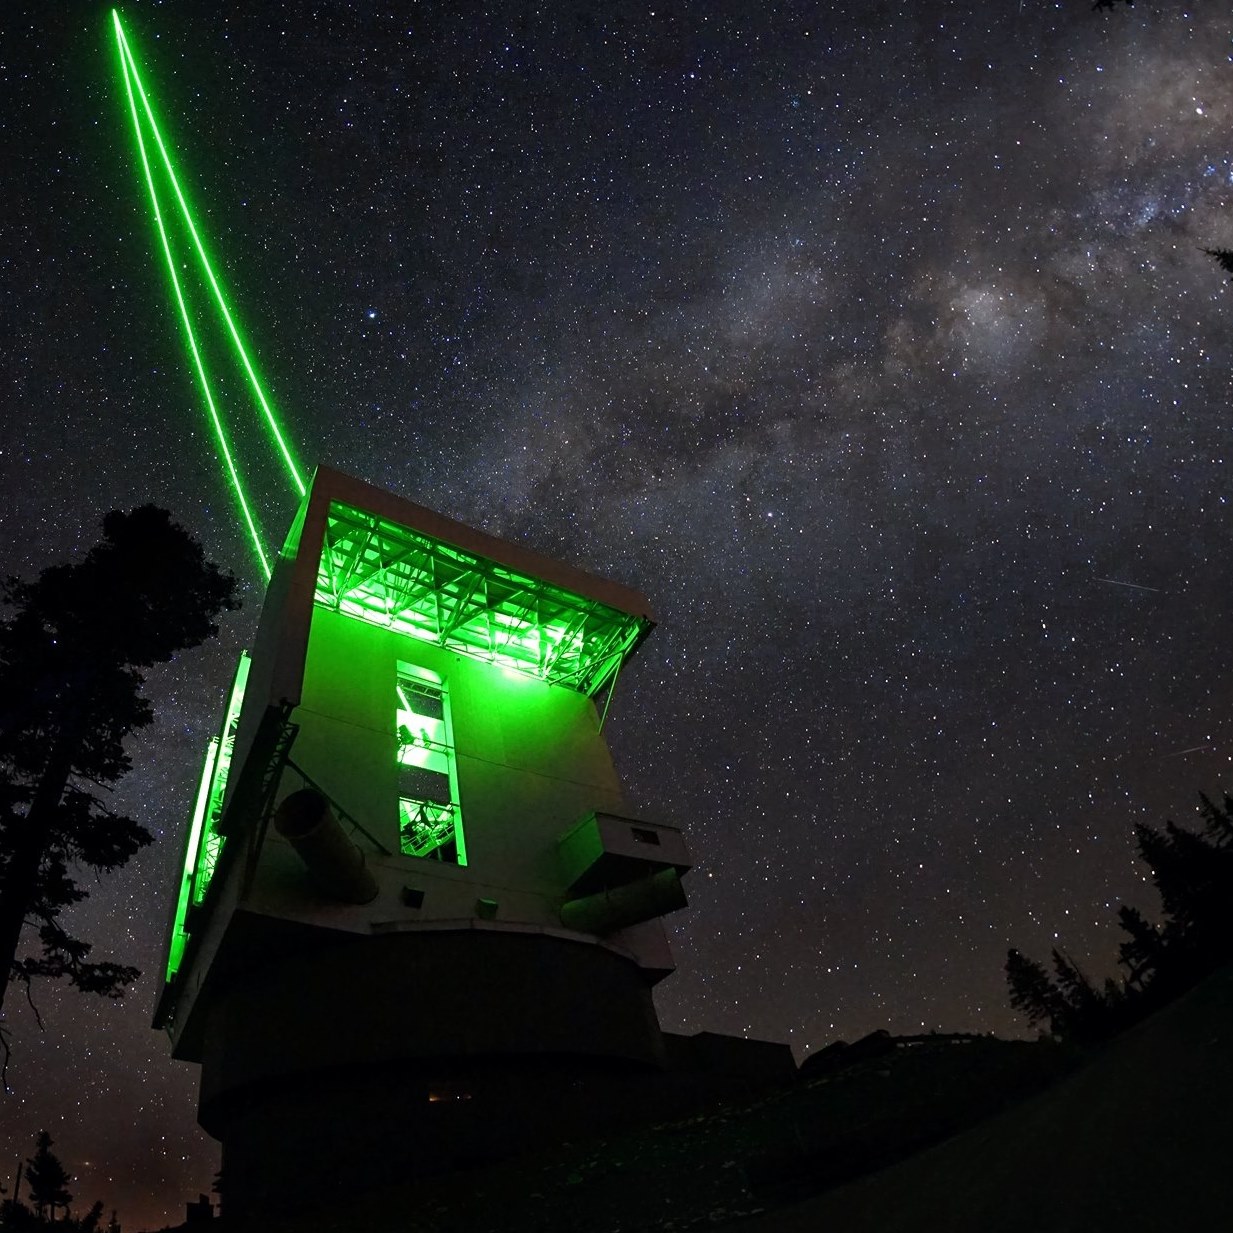 Large Binocular Telescope with the green ARGOS laser guide star system active.